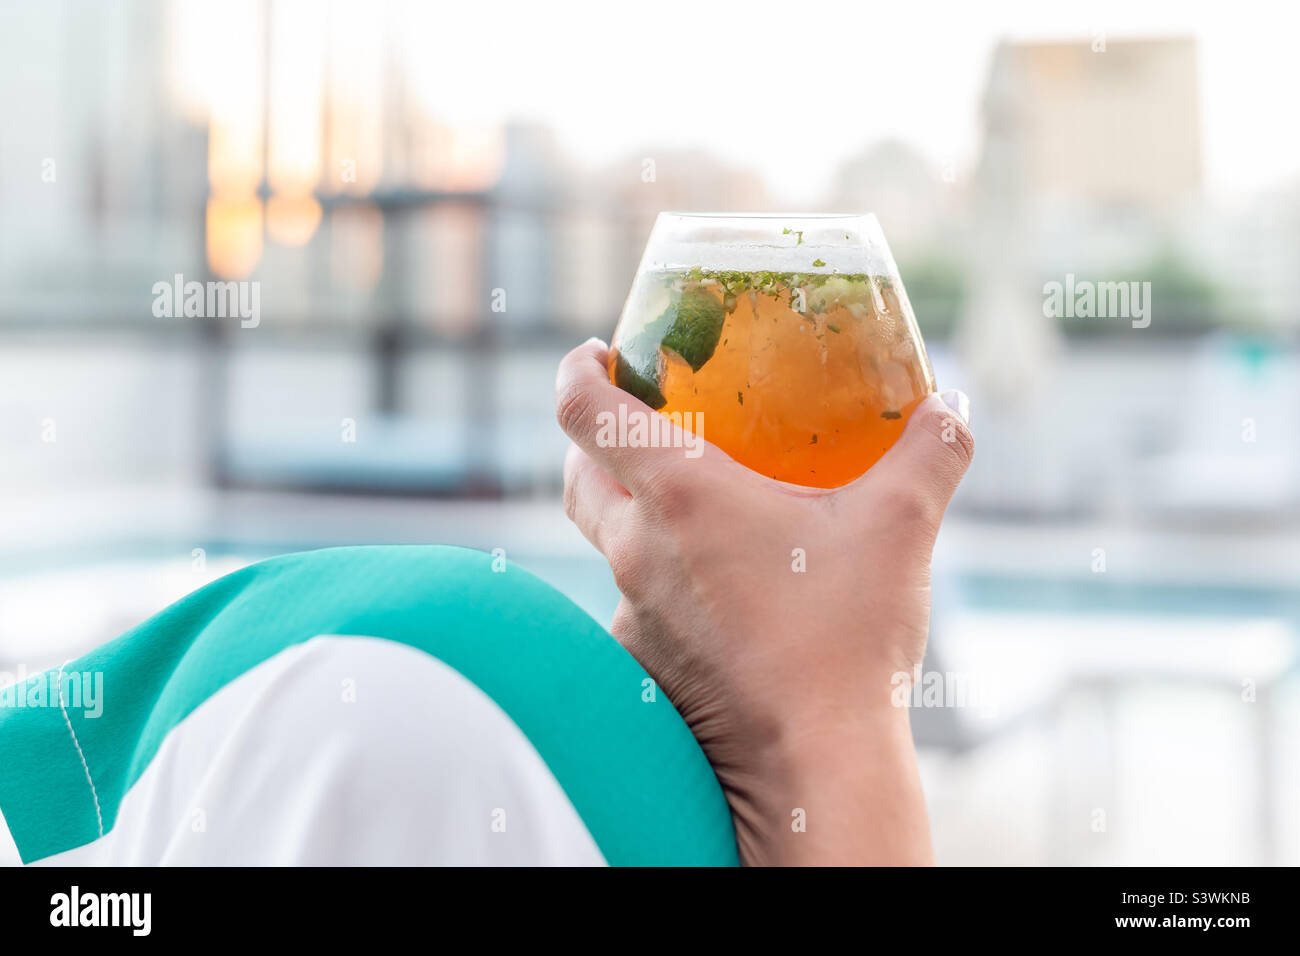 Delicious cocktail in hand, happy hour time at the pool Stock Photo